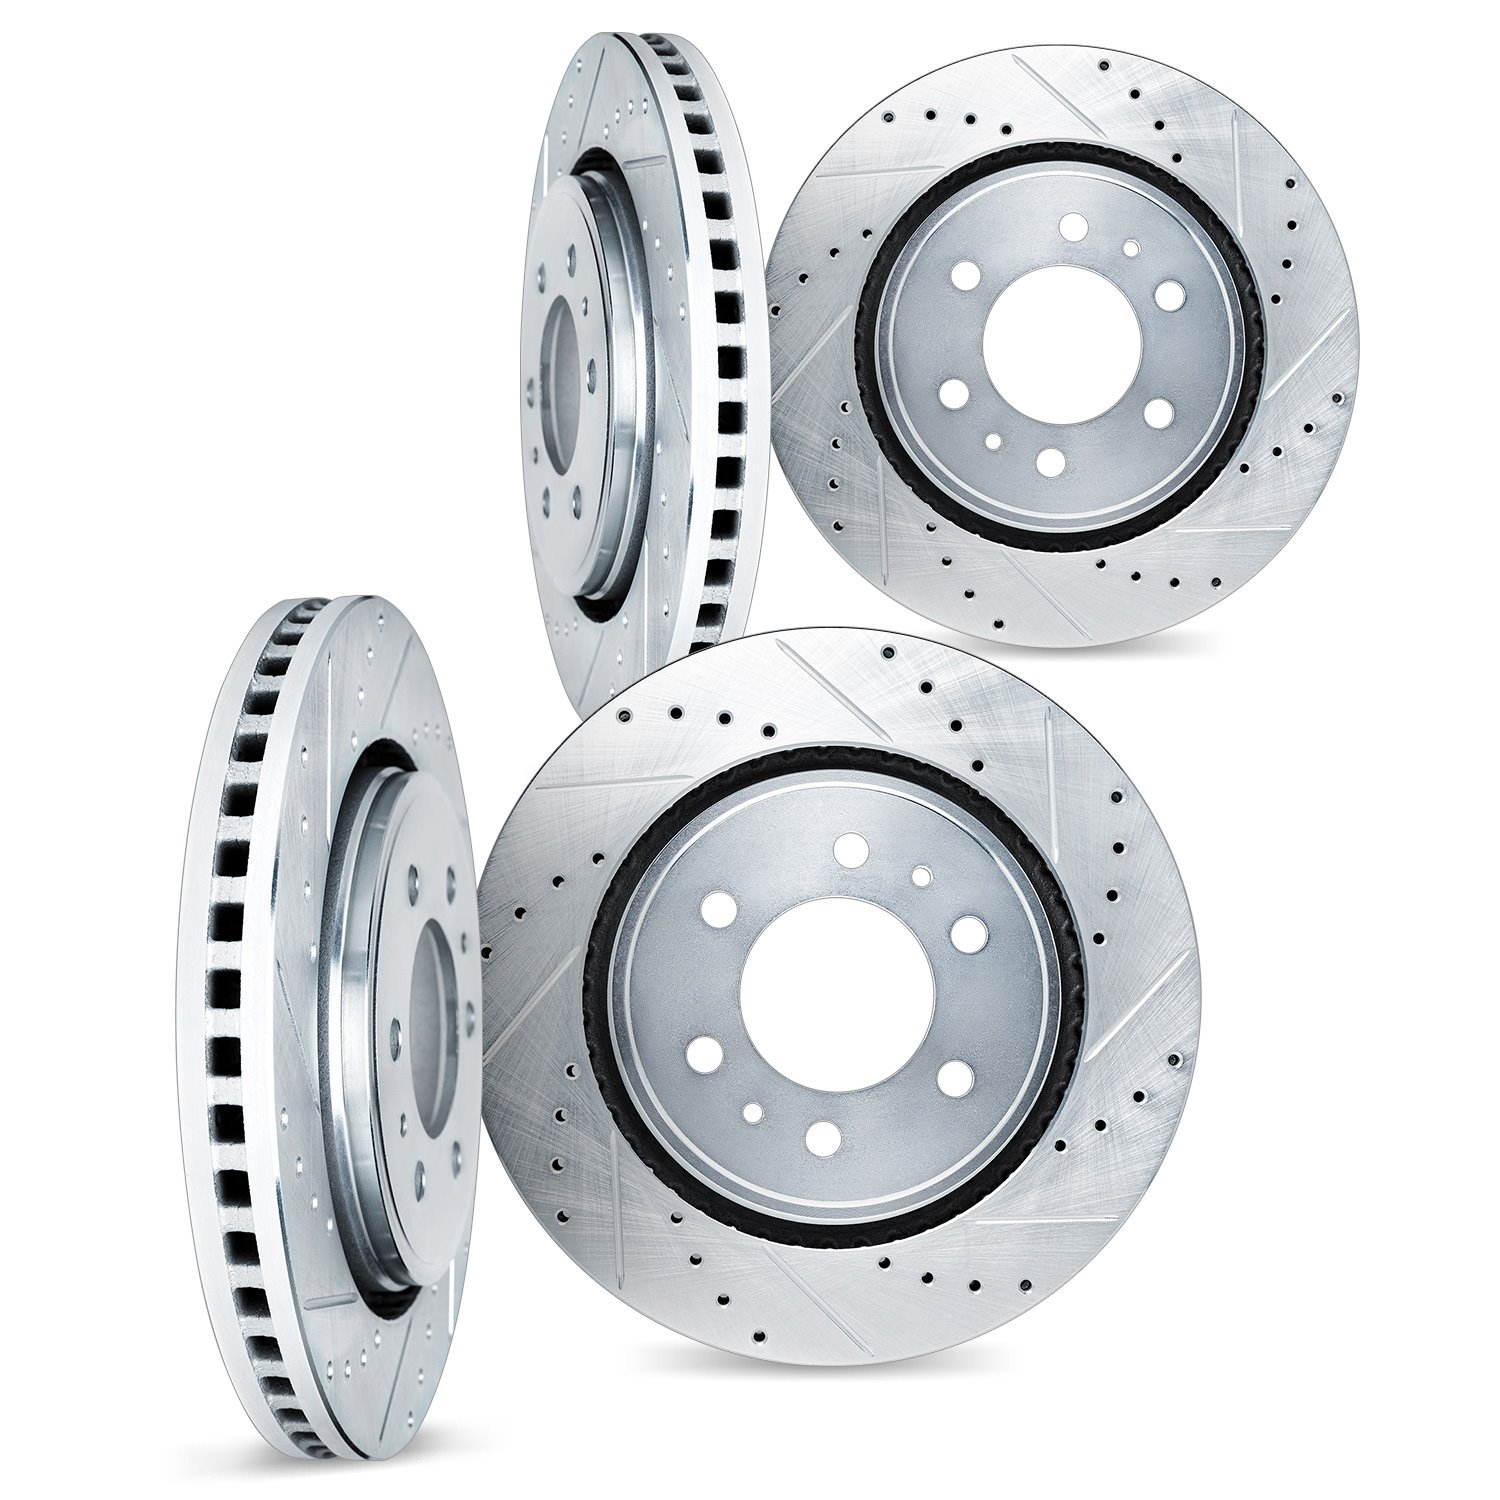 7004-40155 Drilled/Slotted Brake Rotors [Silver], Fits Select Multiple Makes/Models, Position: Front and Rear